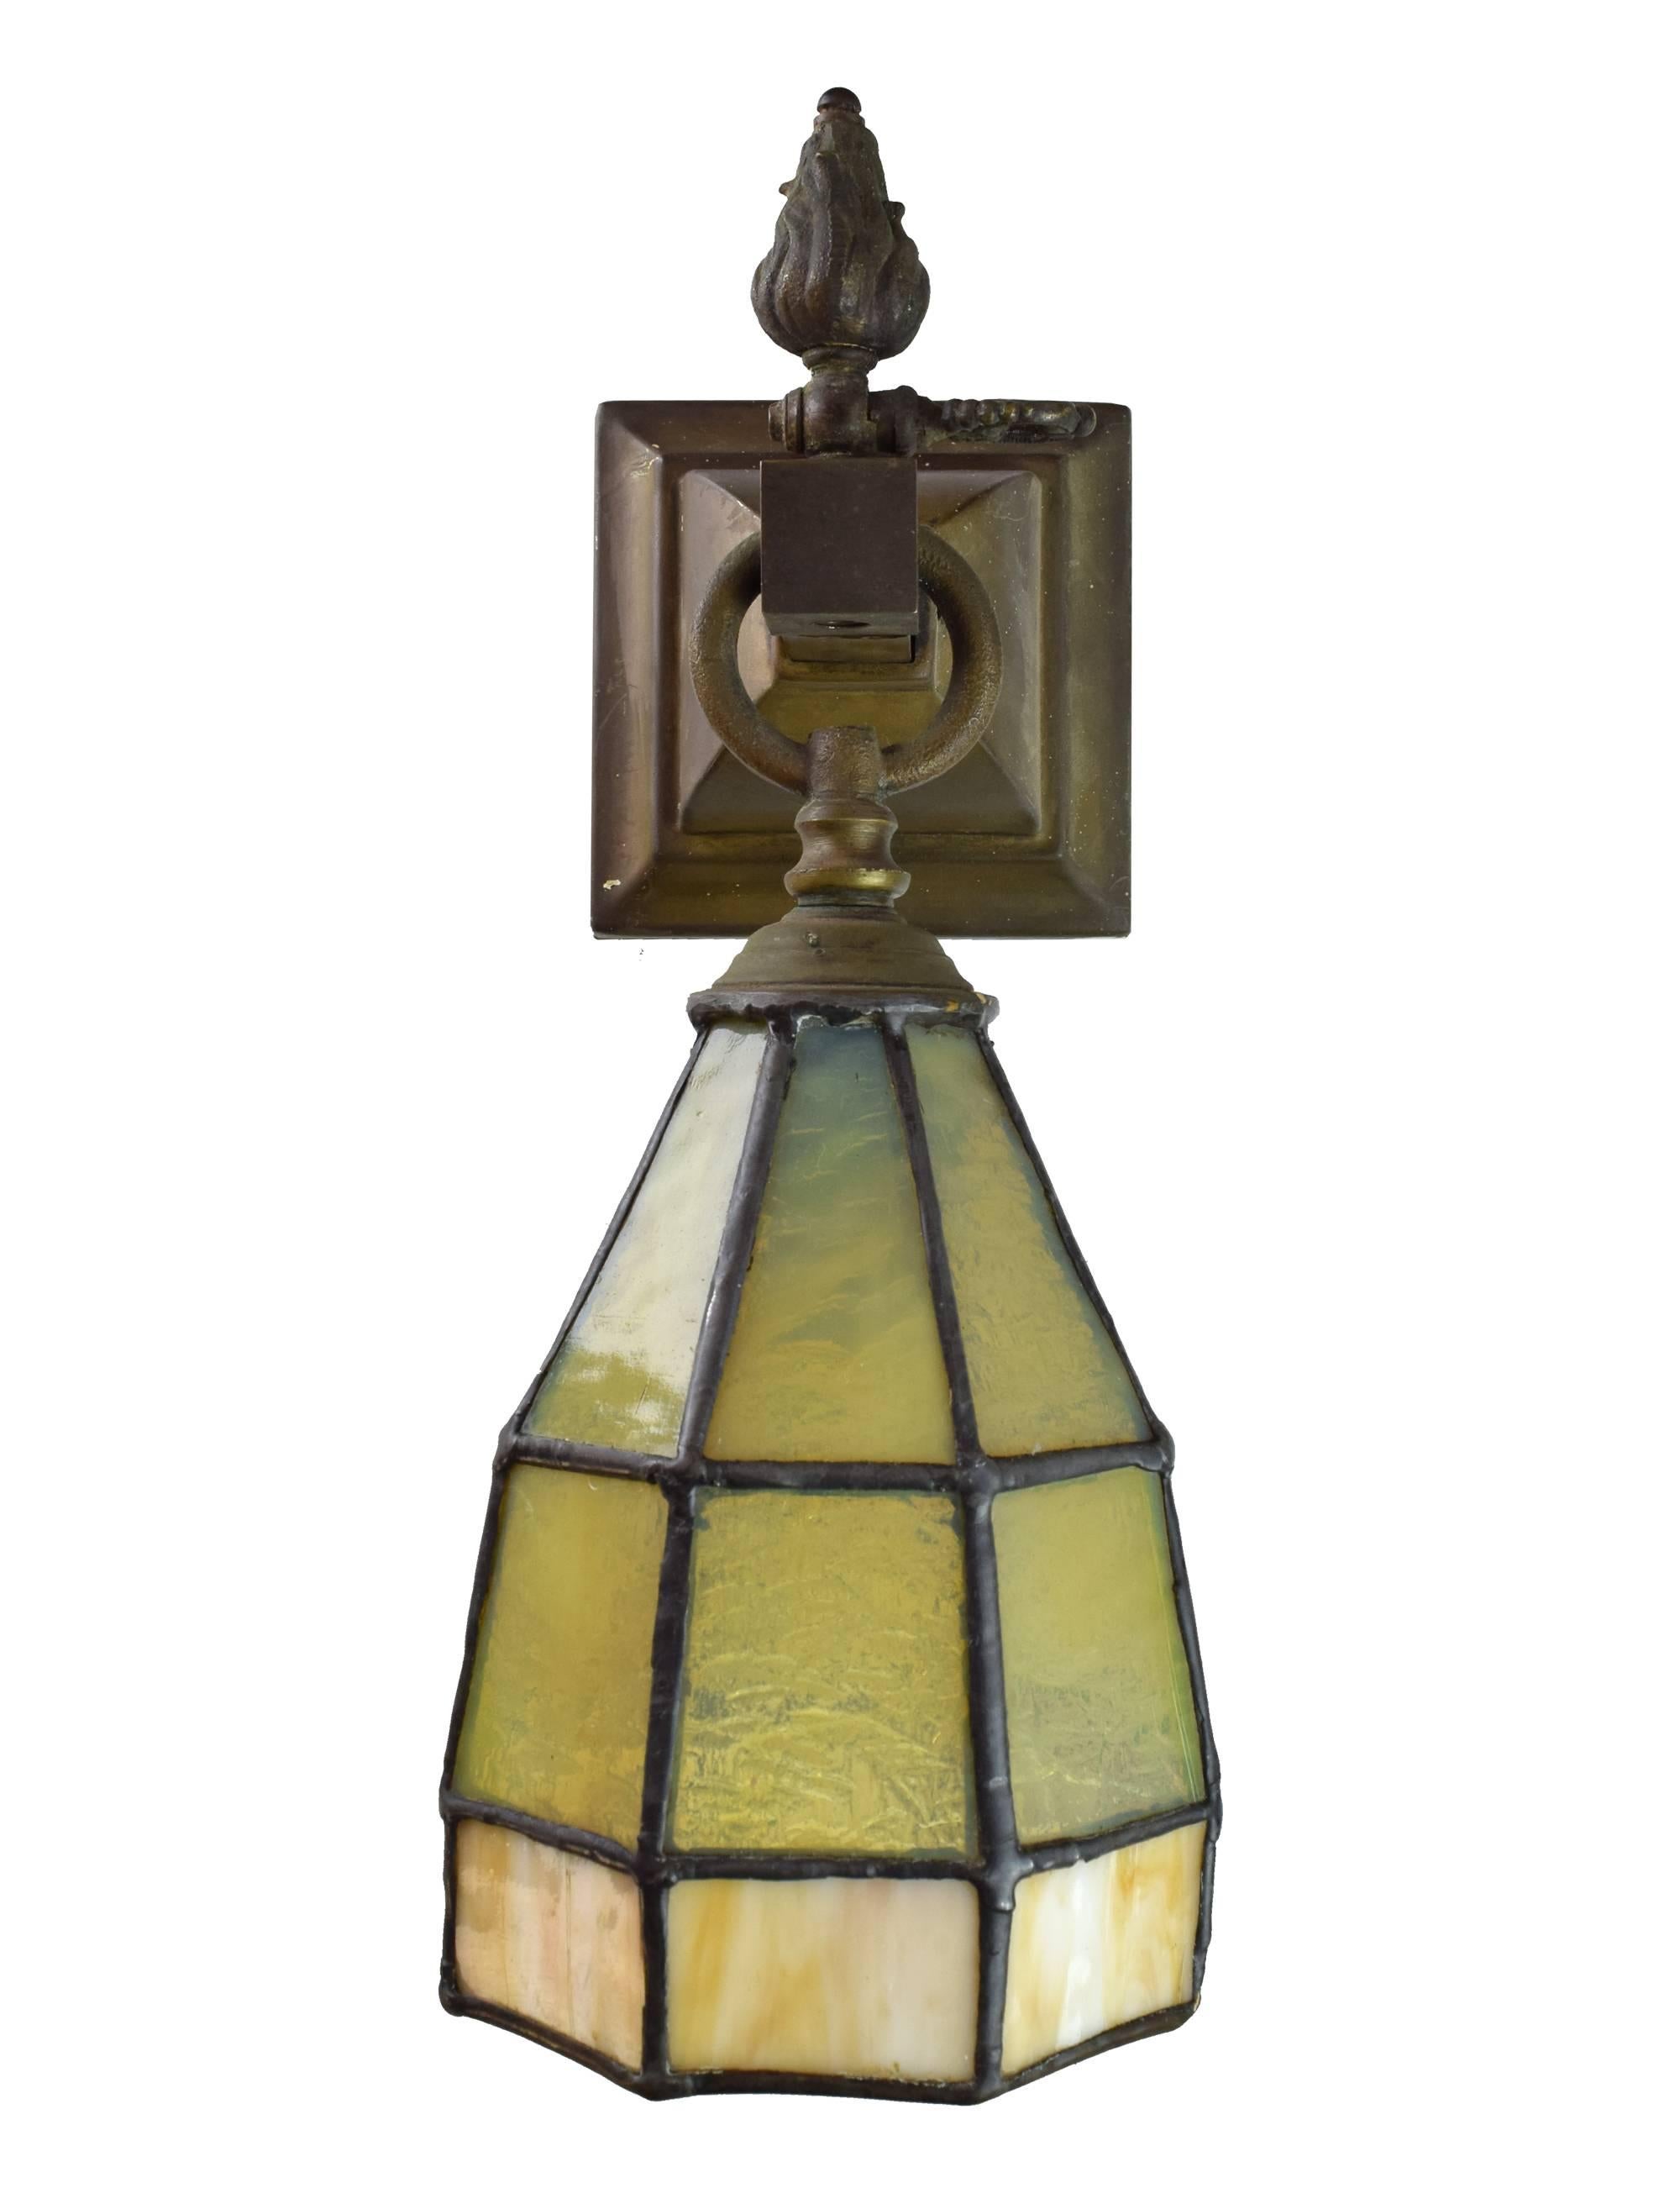 A fabulous pair of original Arts and Crafts-style sconces with a stained glass shade and a lovely original brass patina. This early pair has both gas/electric components. Matching chandelier also available. 

Measures: 12.5